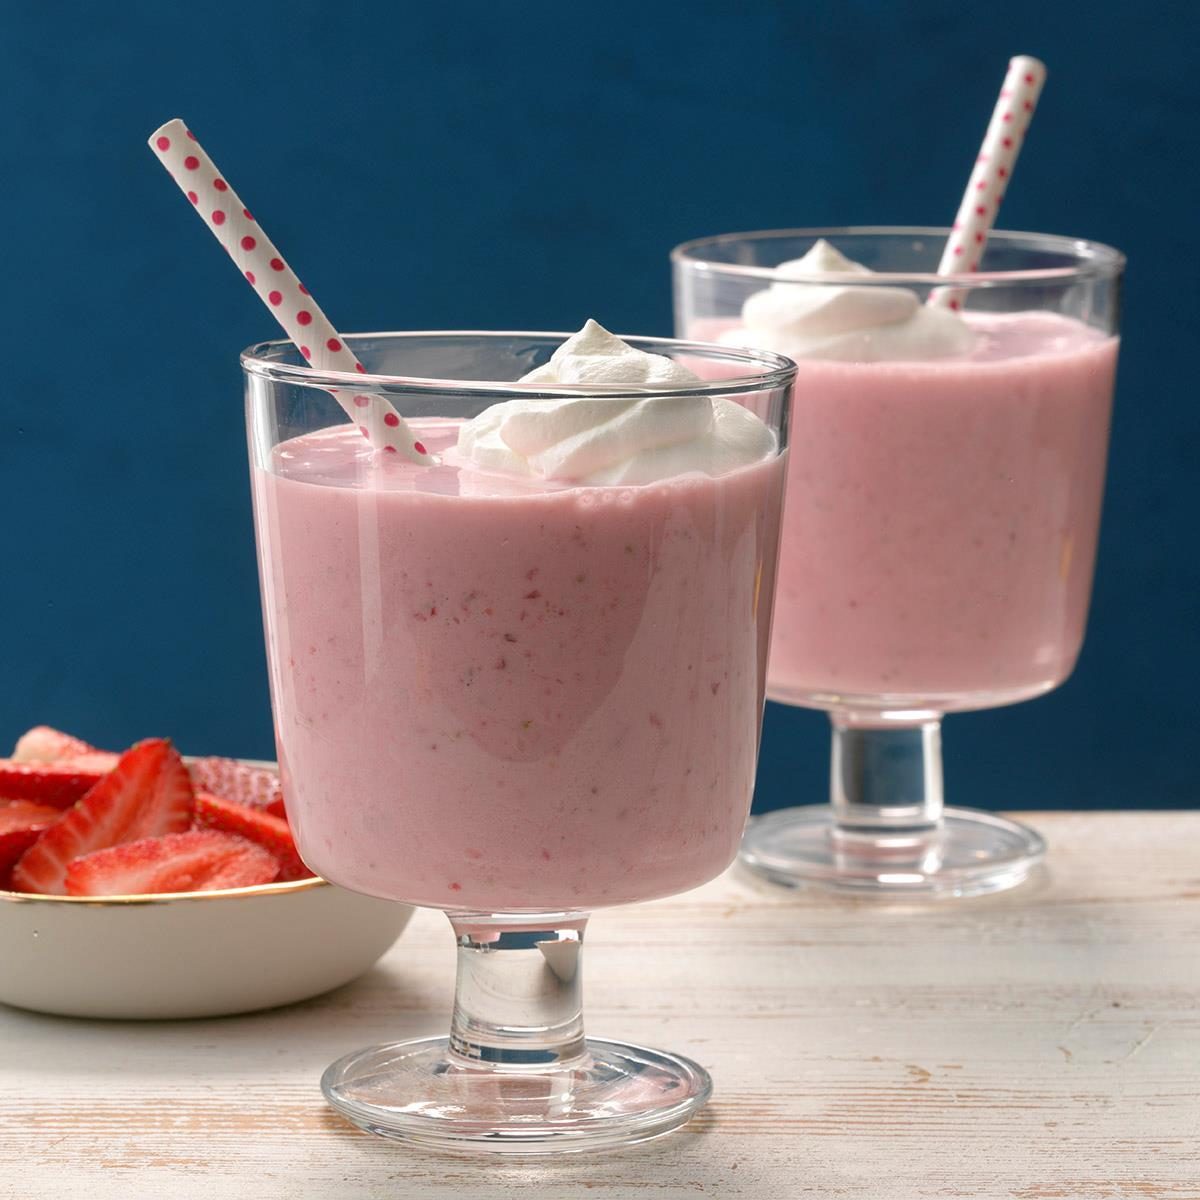 Strawberry Shakes Recipe: How to Make It